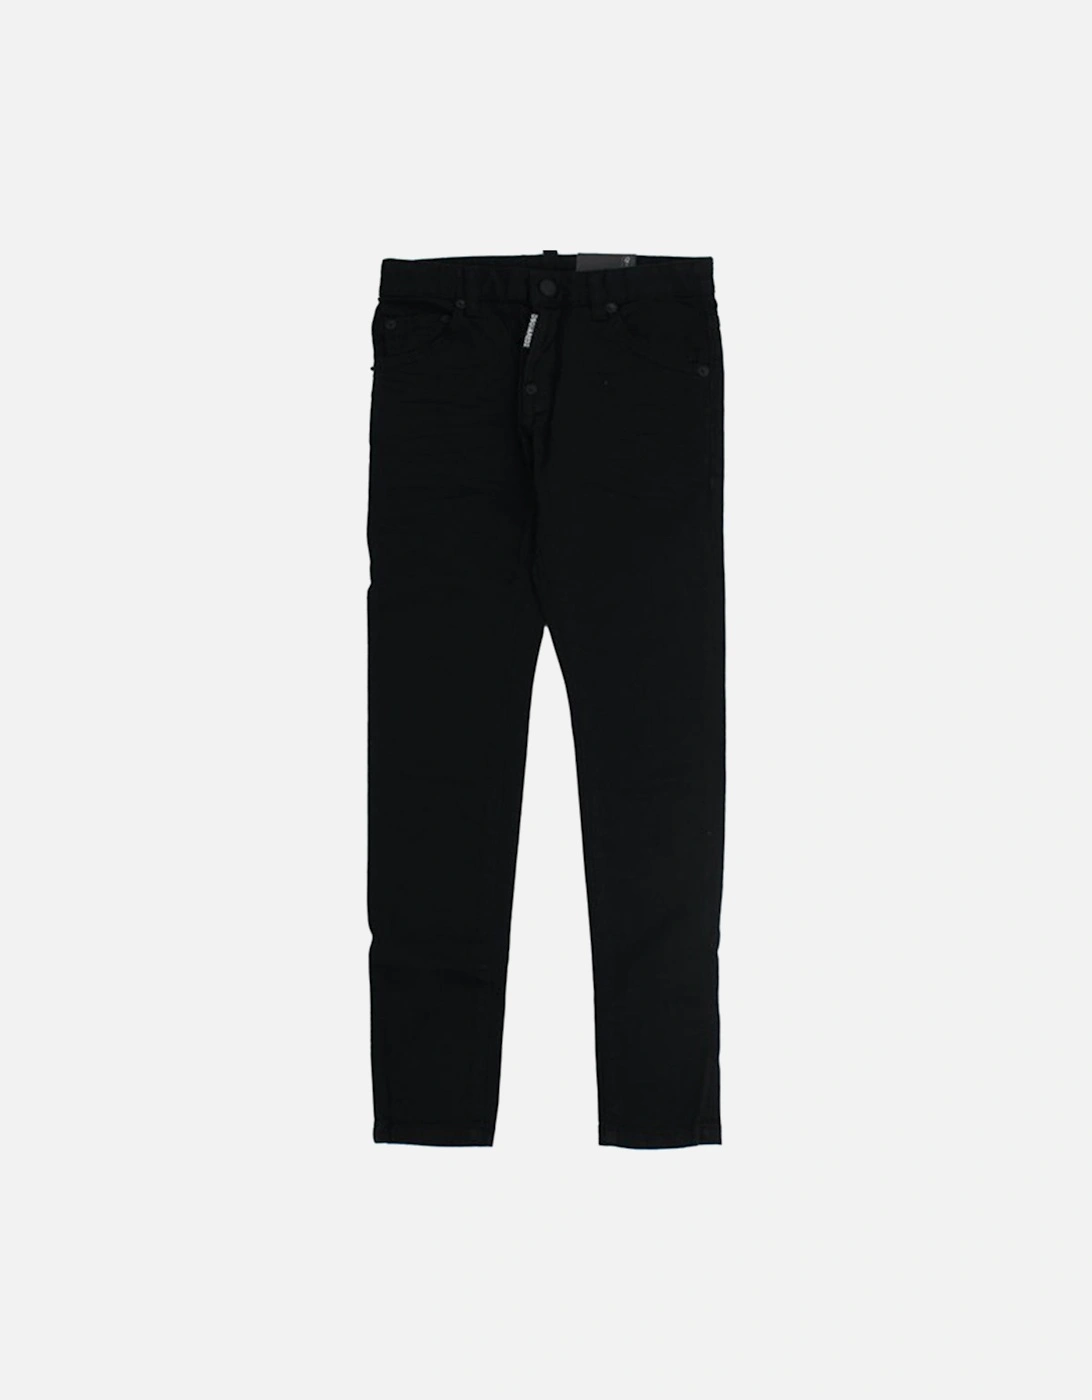 Boys Cool guy jeans Black, 3 of 2